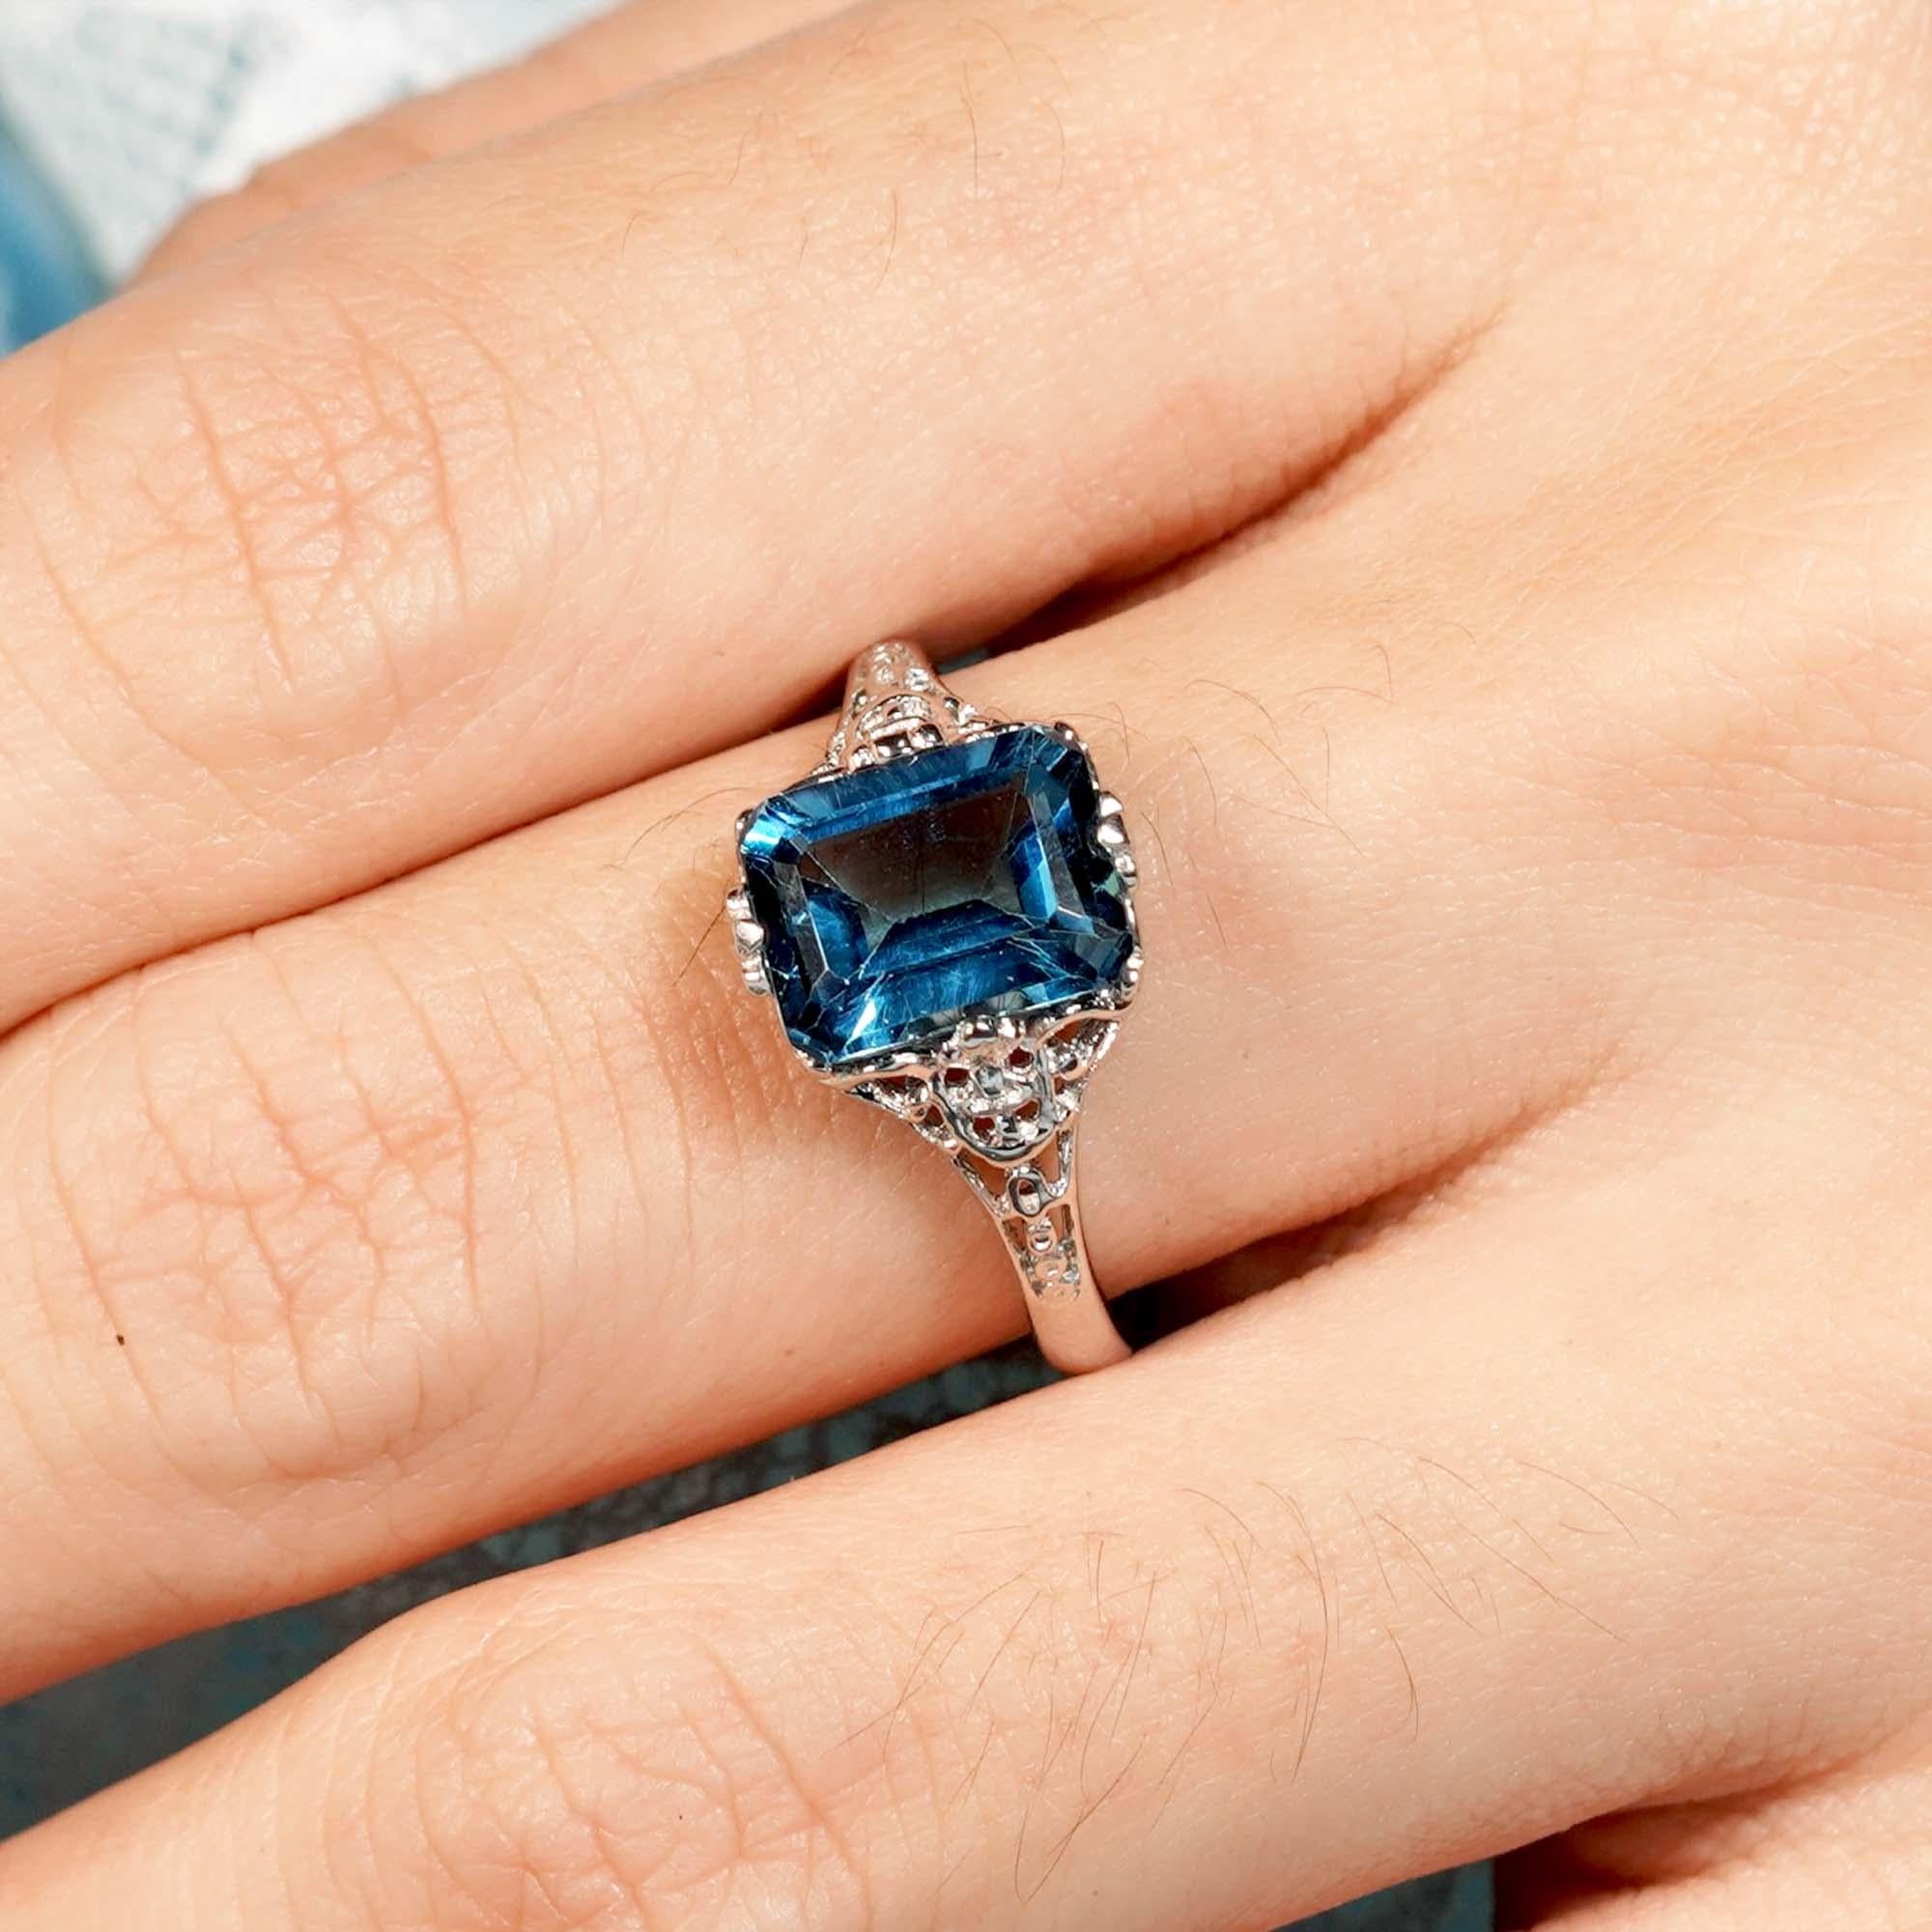 For Sale:  4.5 Ct. Natural London Blue Topaz Vintage Style Solitaire Ring in 9K White Gold 8